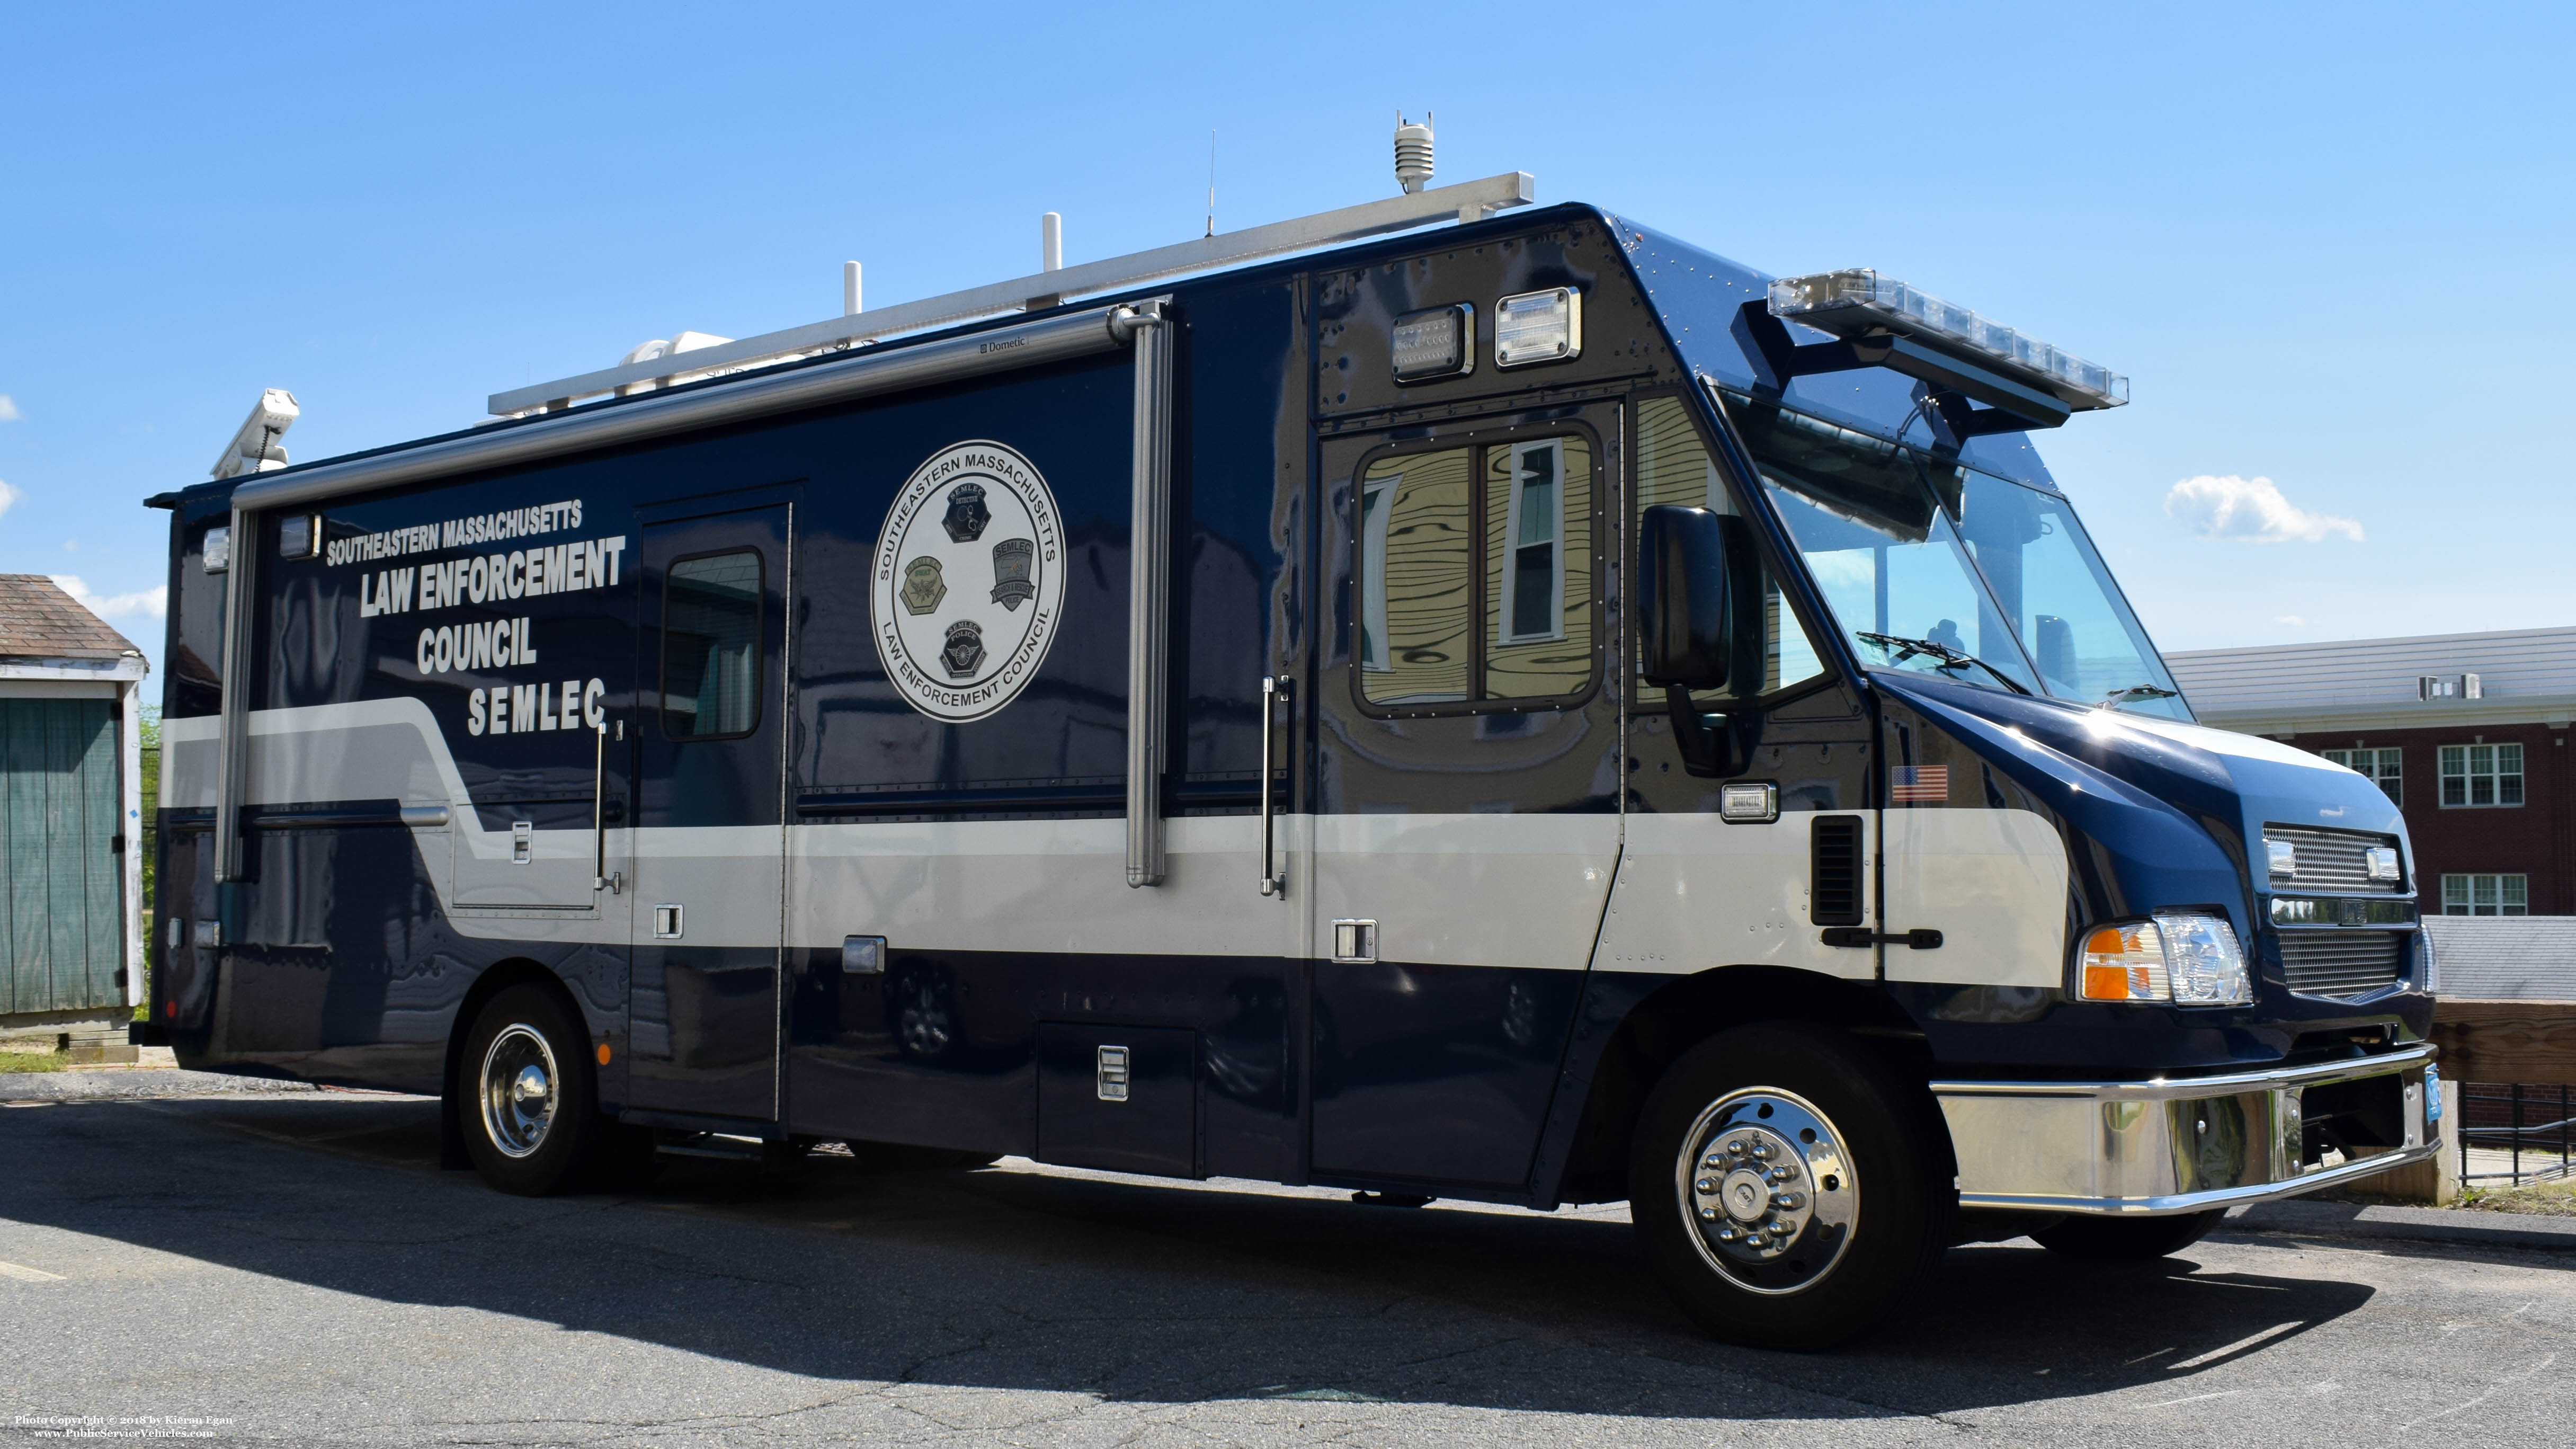 A photo  of Southeastern Massachusetts Law Enforcement Council
            Mobile Command Center, a 2011 Ford/LDV Mobile Command Center             taken by Kieran Egan